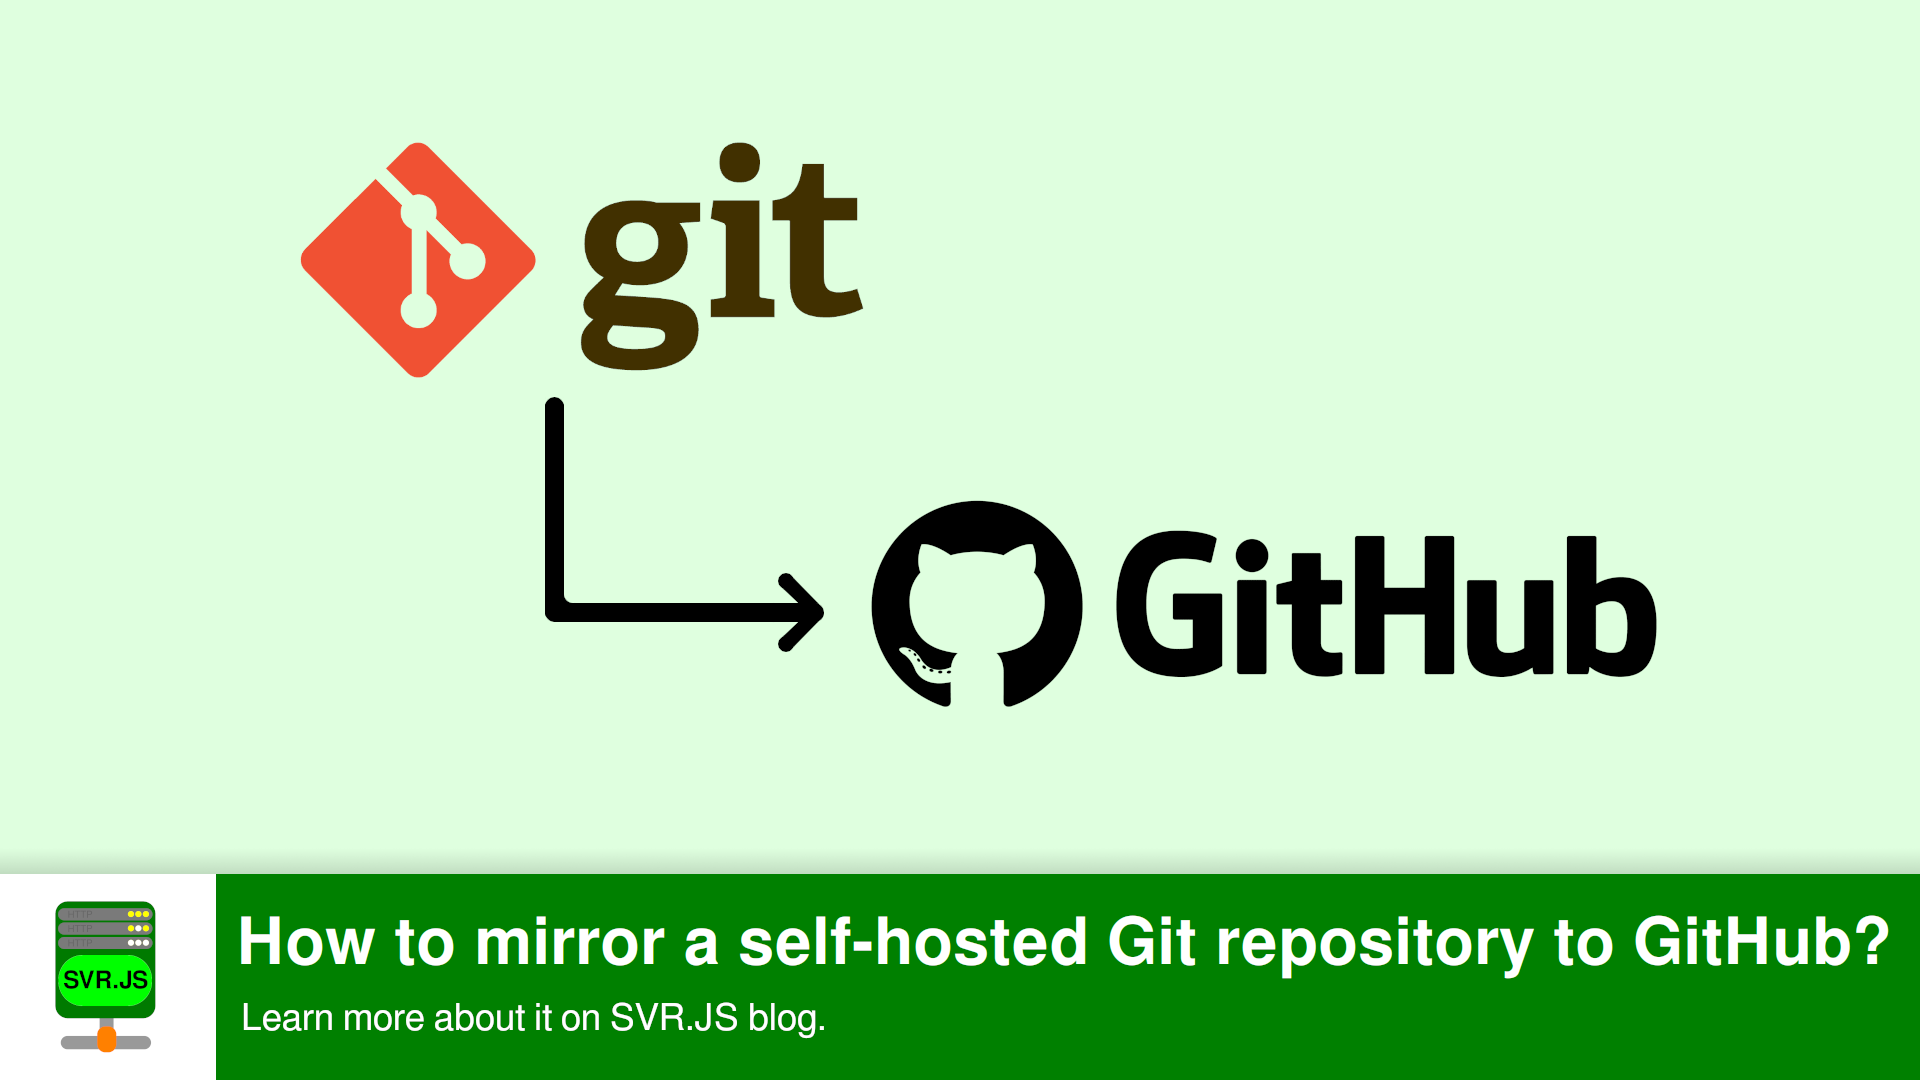 How to mirror a self-hosted Git repository to GitHub?